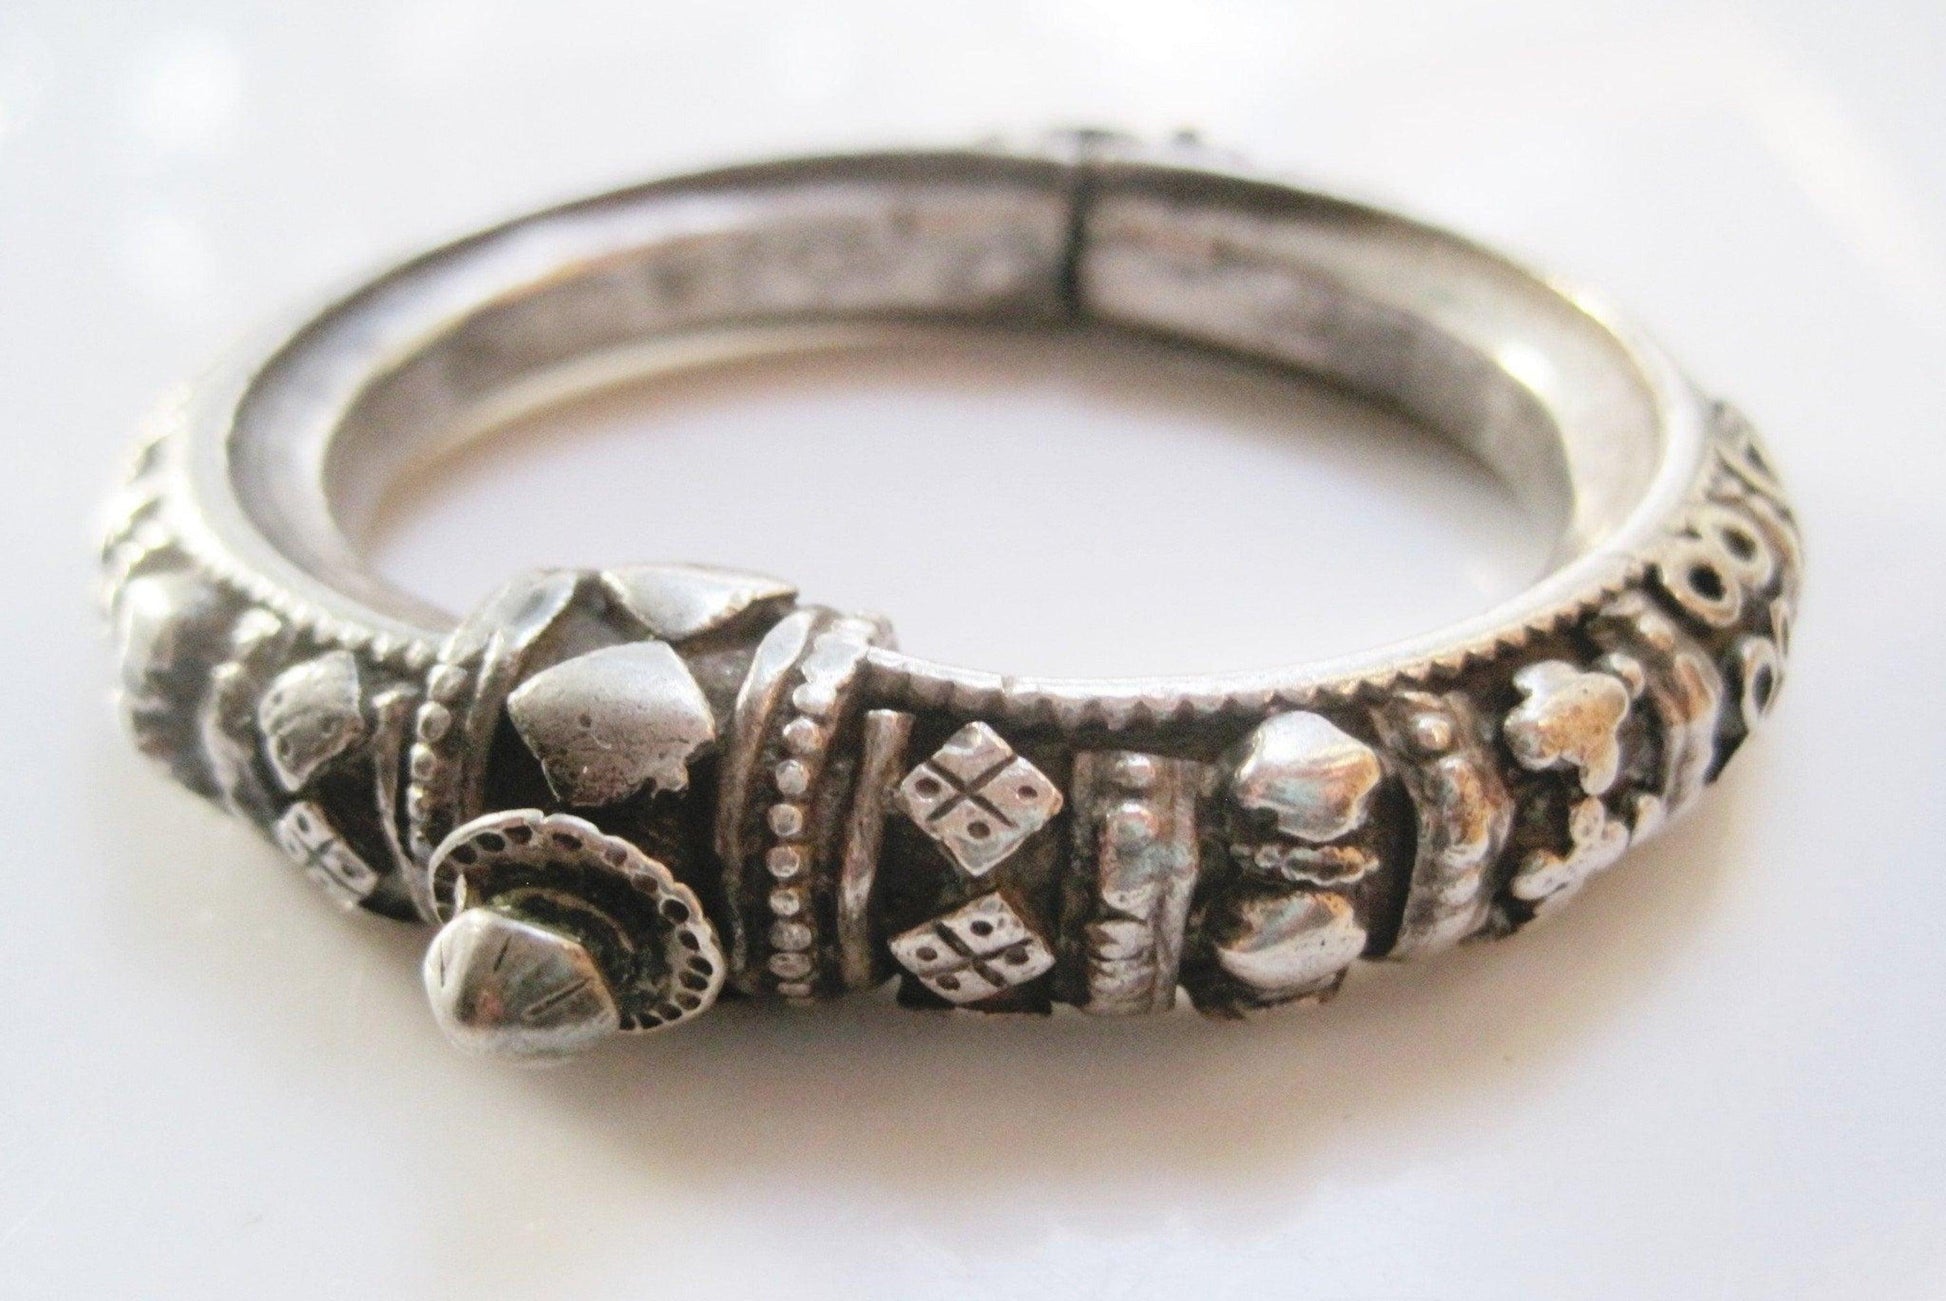 Antique Indian Silver Bracelet for Small Wrist - Anteeka